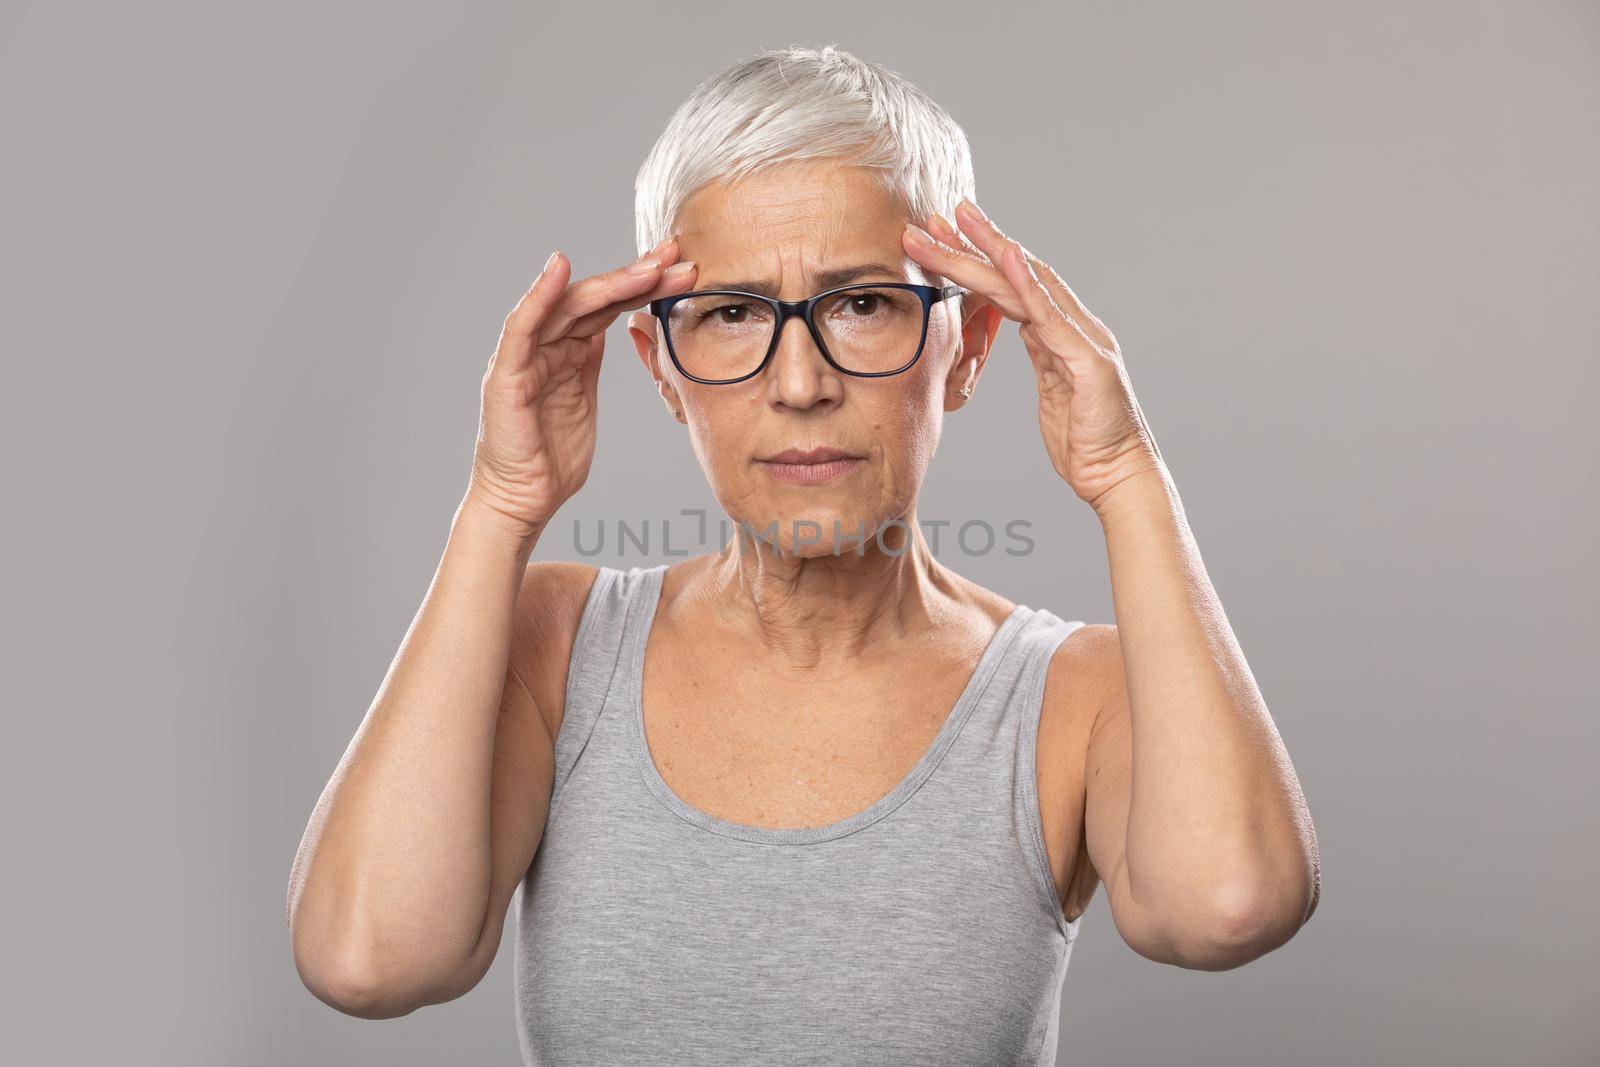 Headache migraine. Worried expression. Senior old woman with short gray hair and glasses show headache problems, healthcare and medicine concept